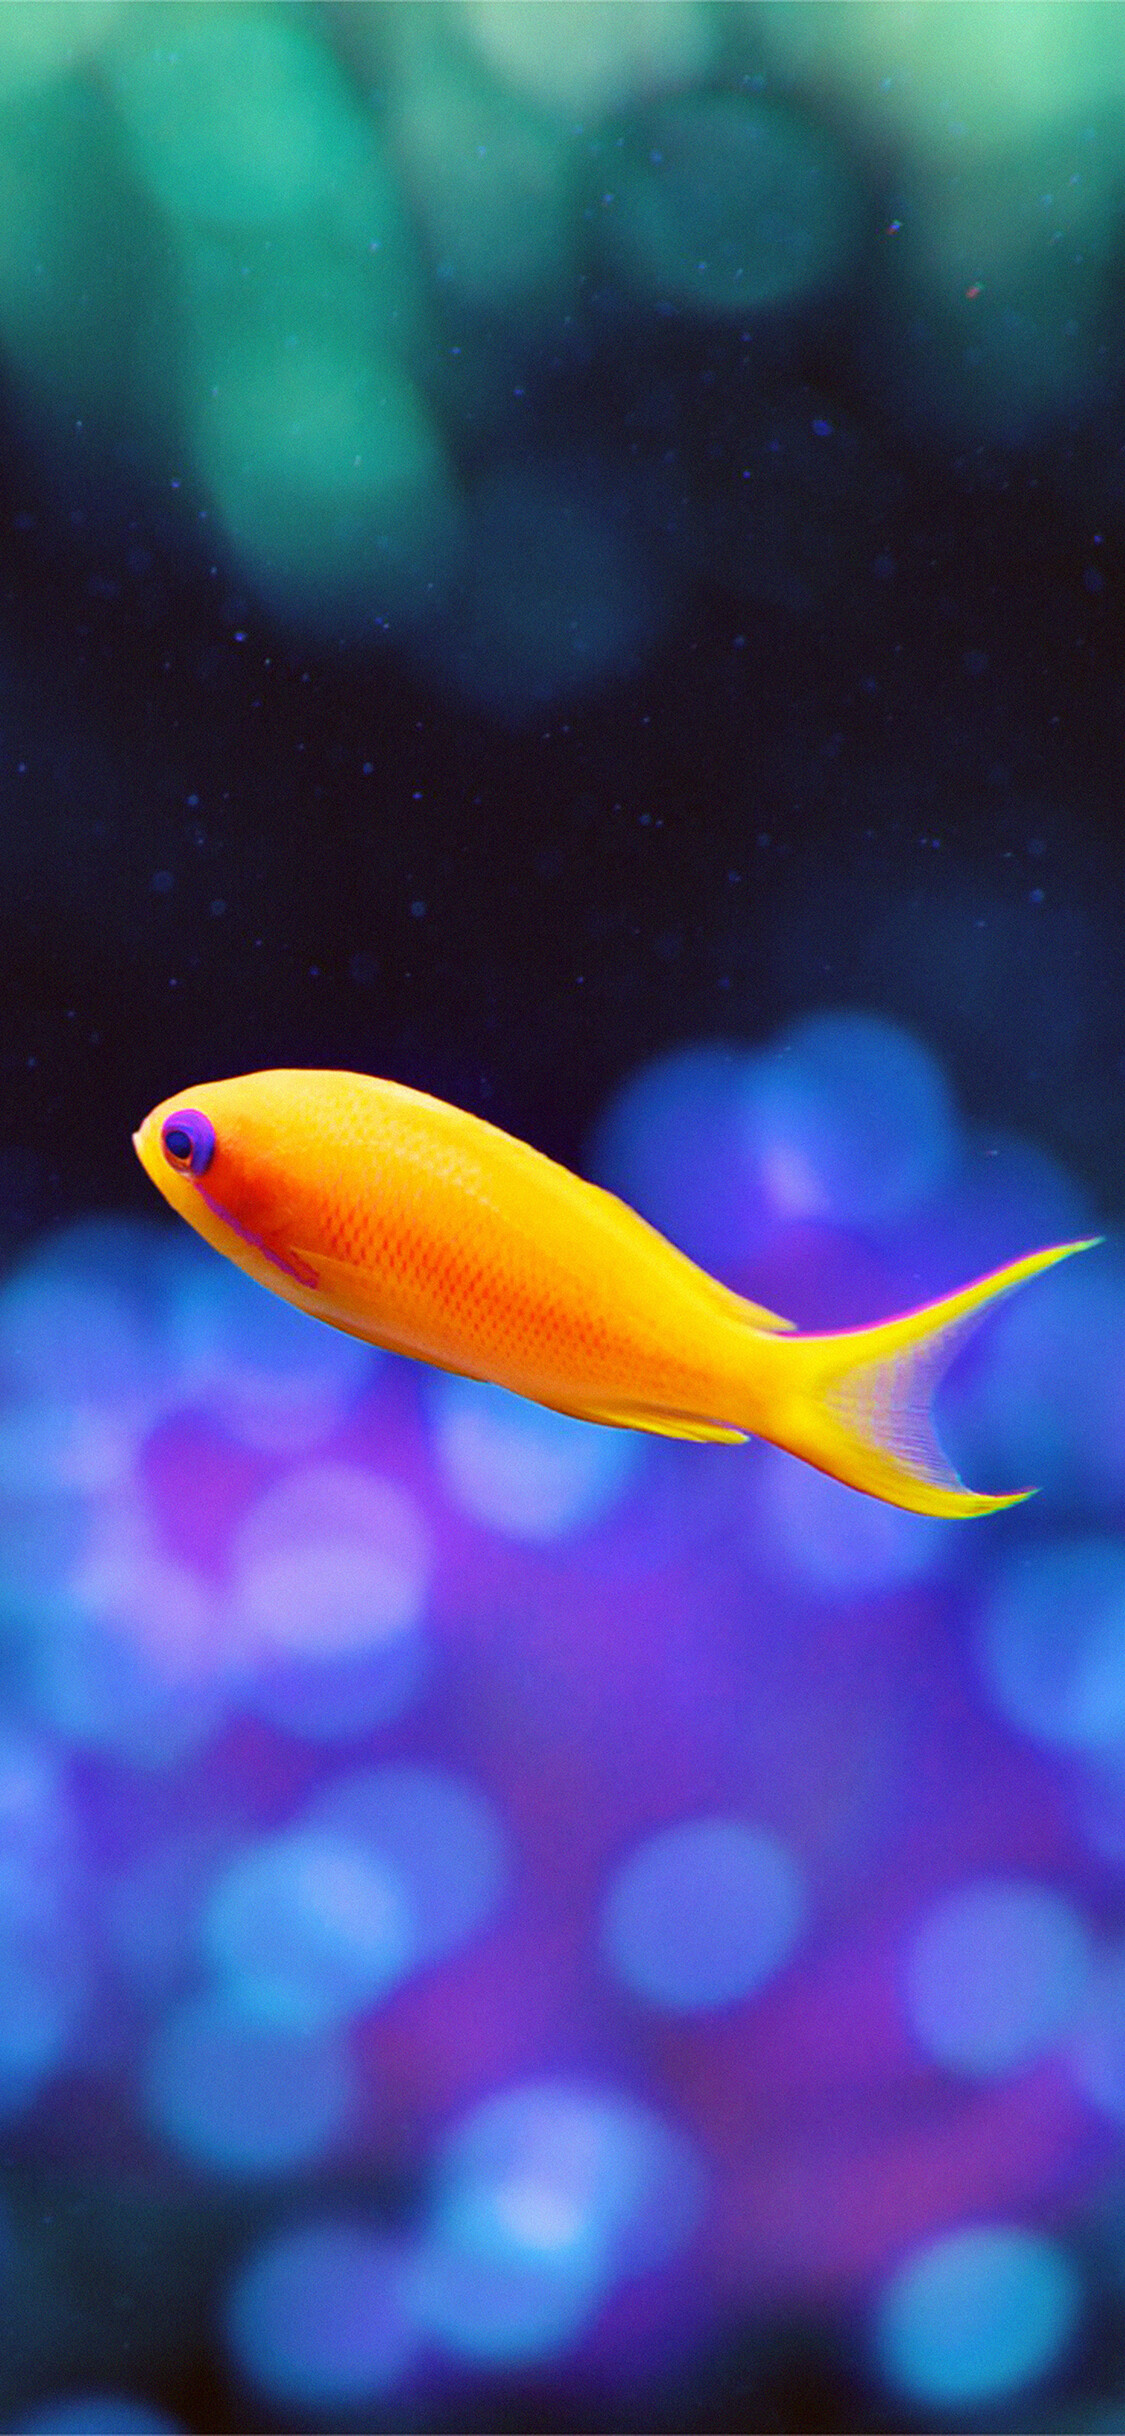 Cute fish nemo wallpaper, Playful and adorable, Underwater charm, Oceanic nature, 1130x2440 HD Phone